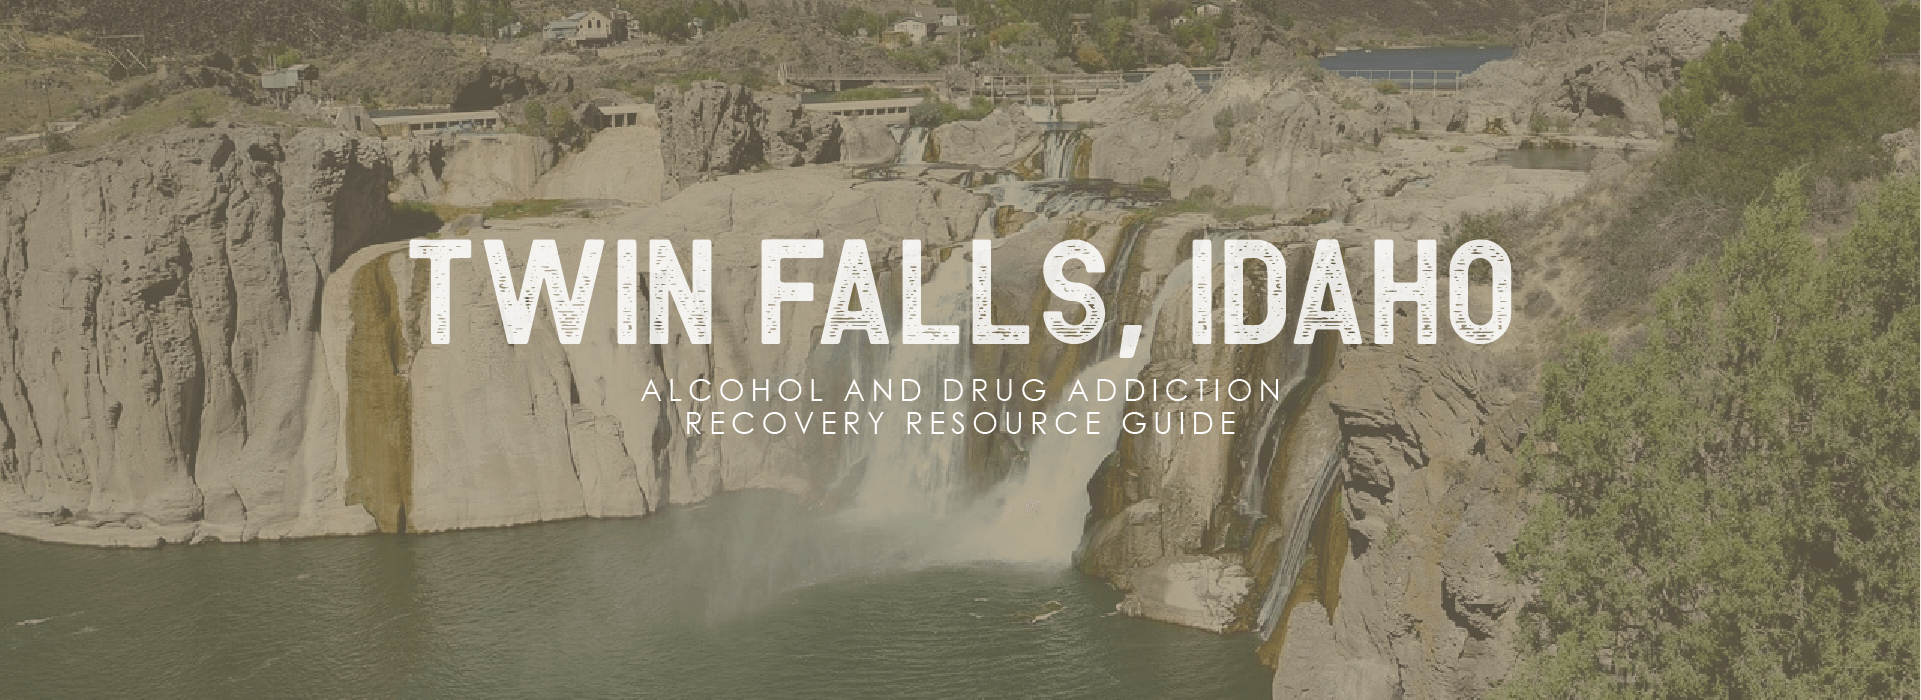 Twin falls, Idaho. Alcohol and drug addiction recovery resource guide